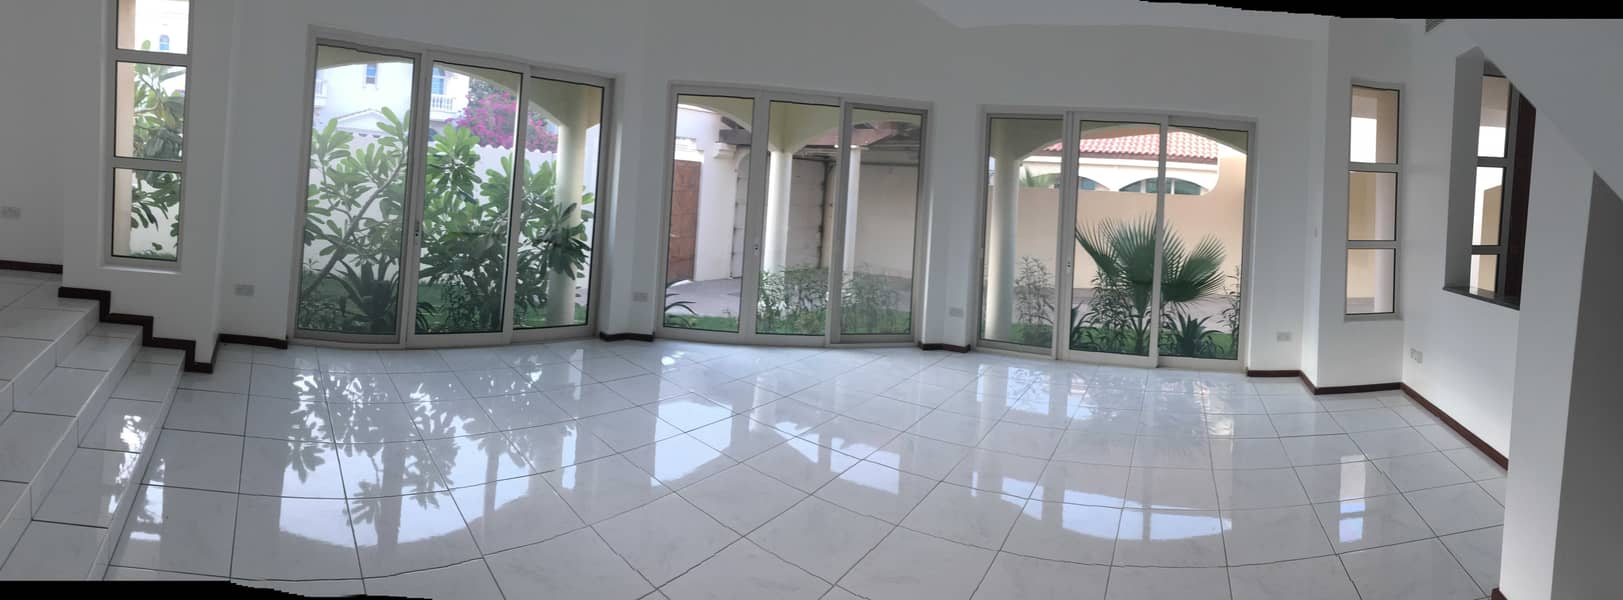 6 Outstanding property: 5 b/r compound villa + maids room + sharing s/pool + GYM + landscaped garden